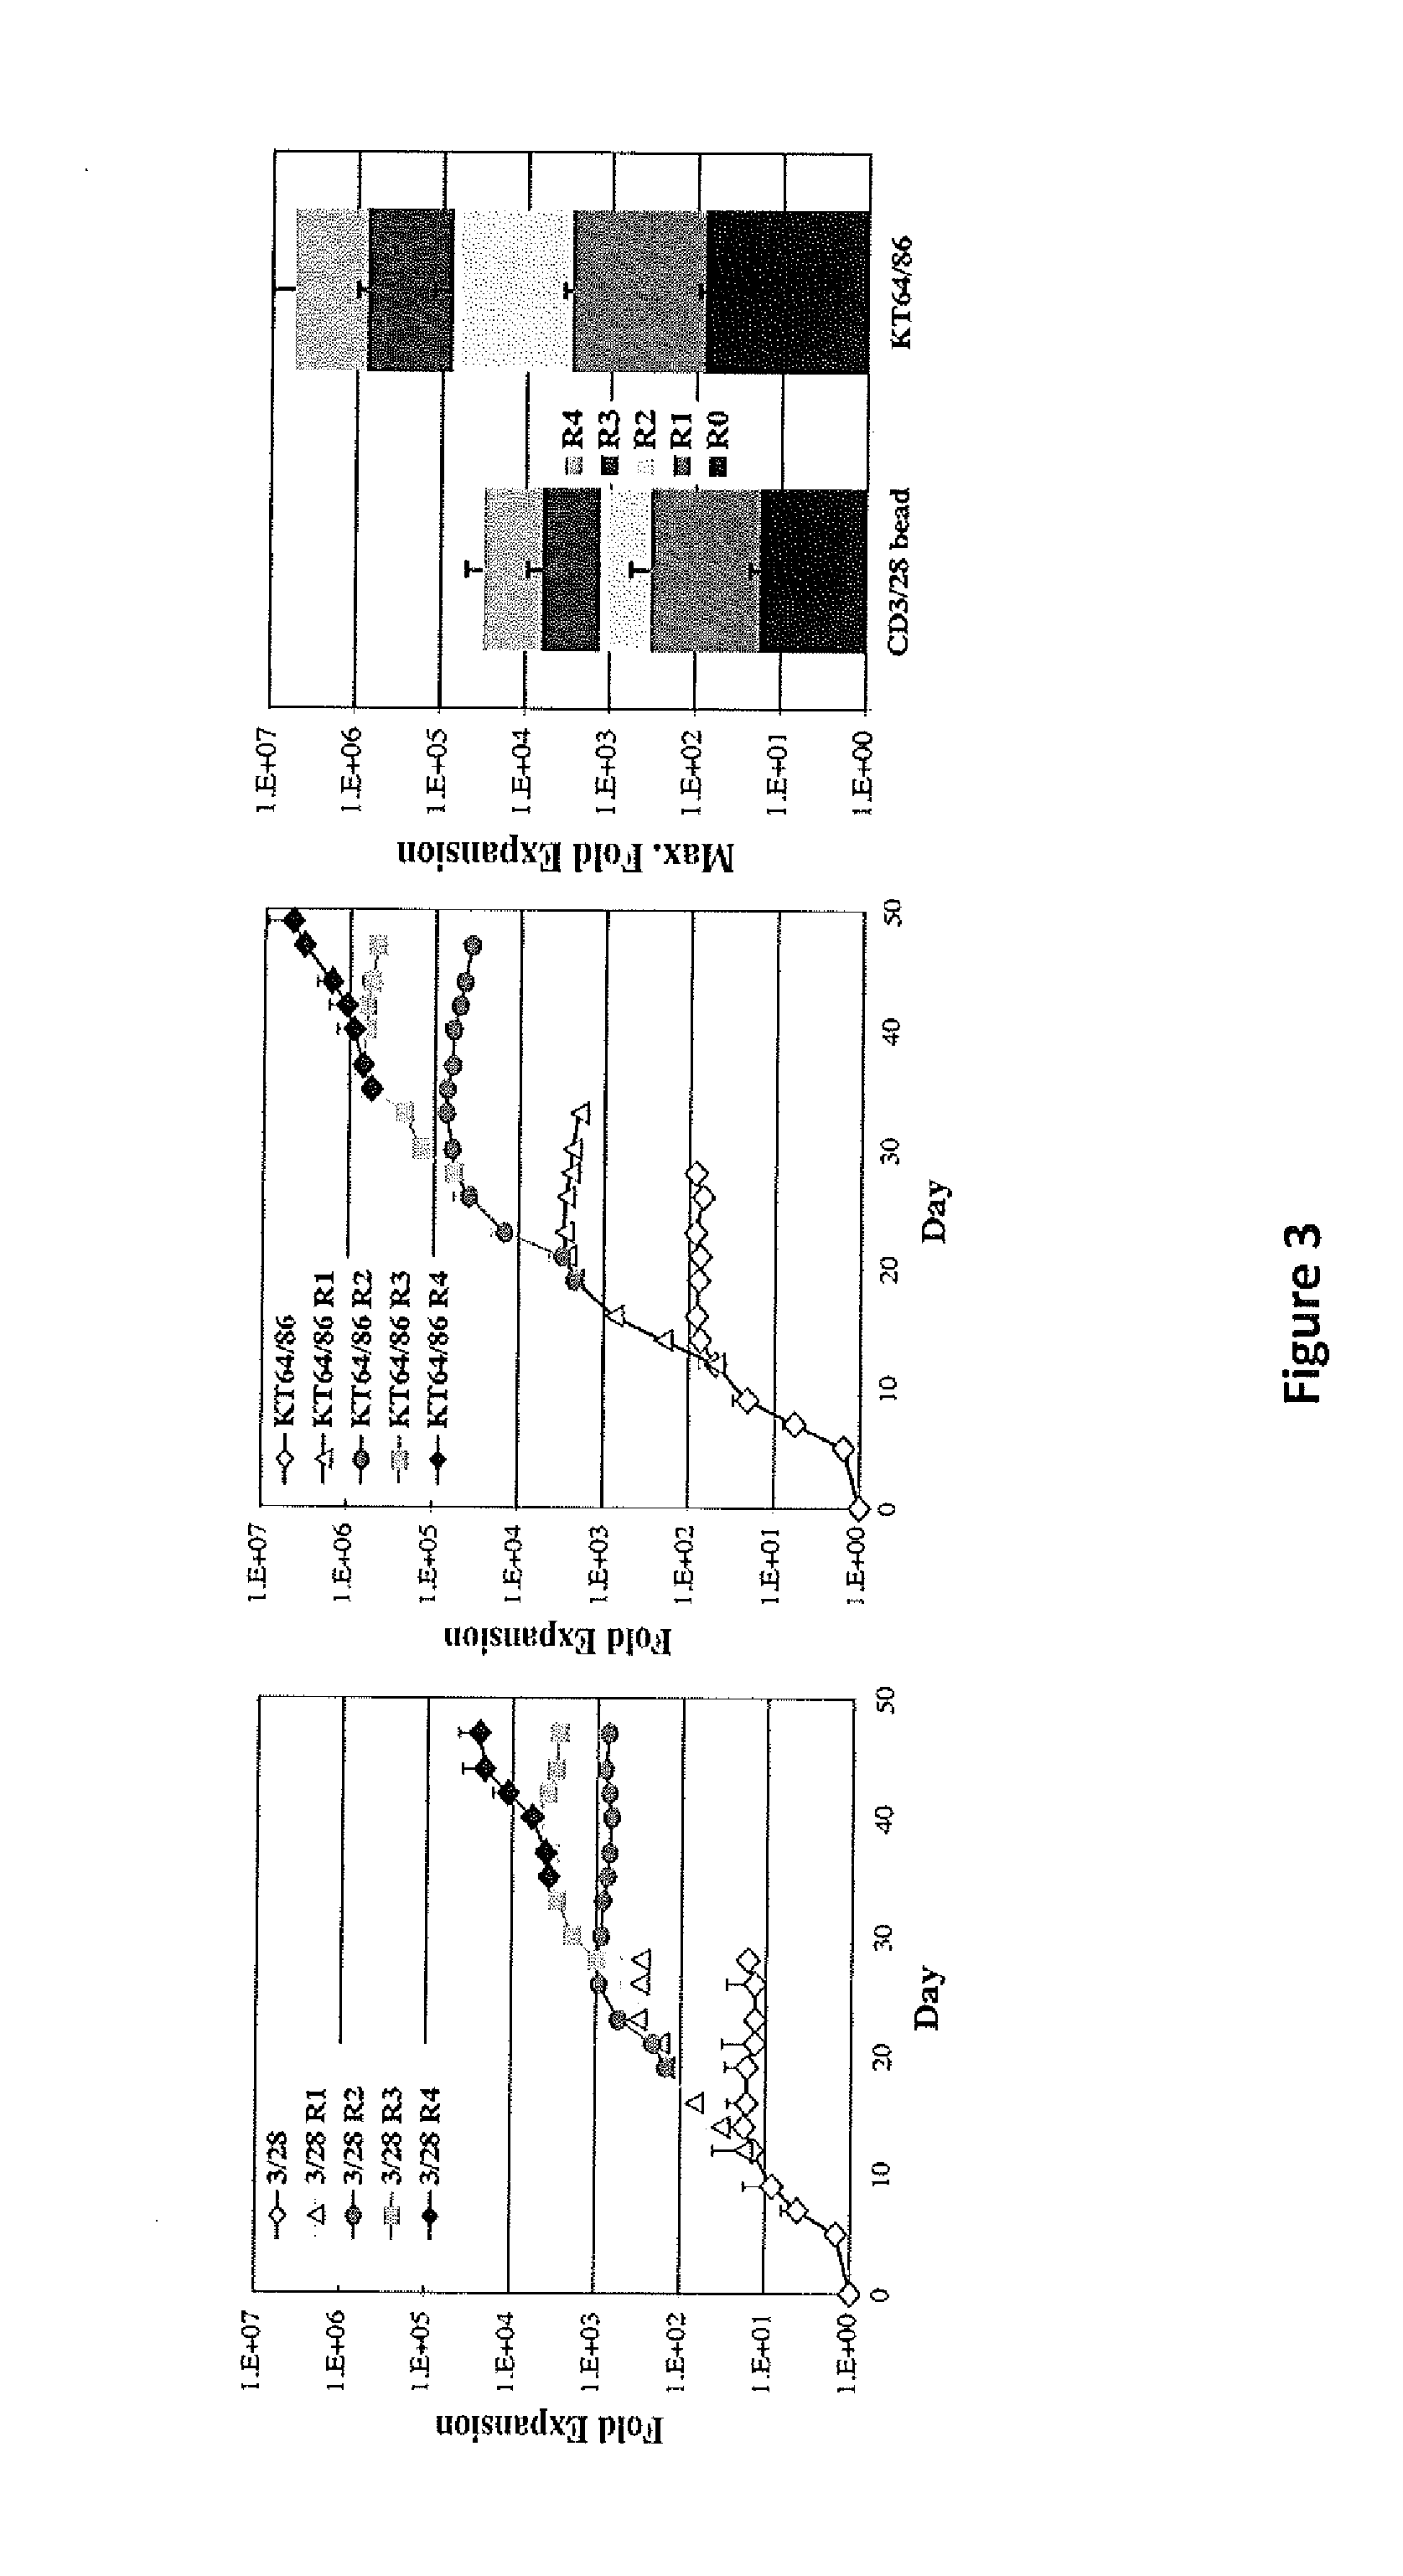 Methods to Expand a T Regulatory Cell Master Cell Bank